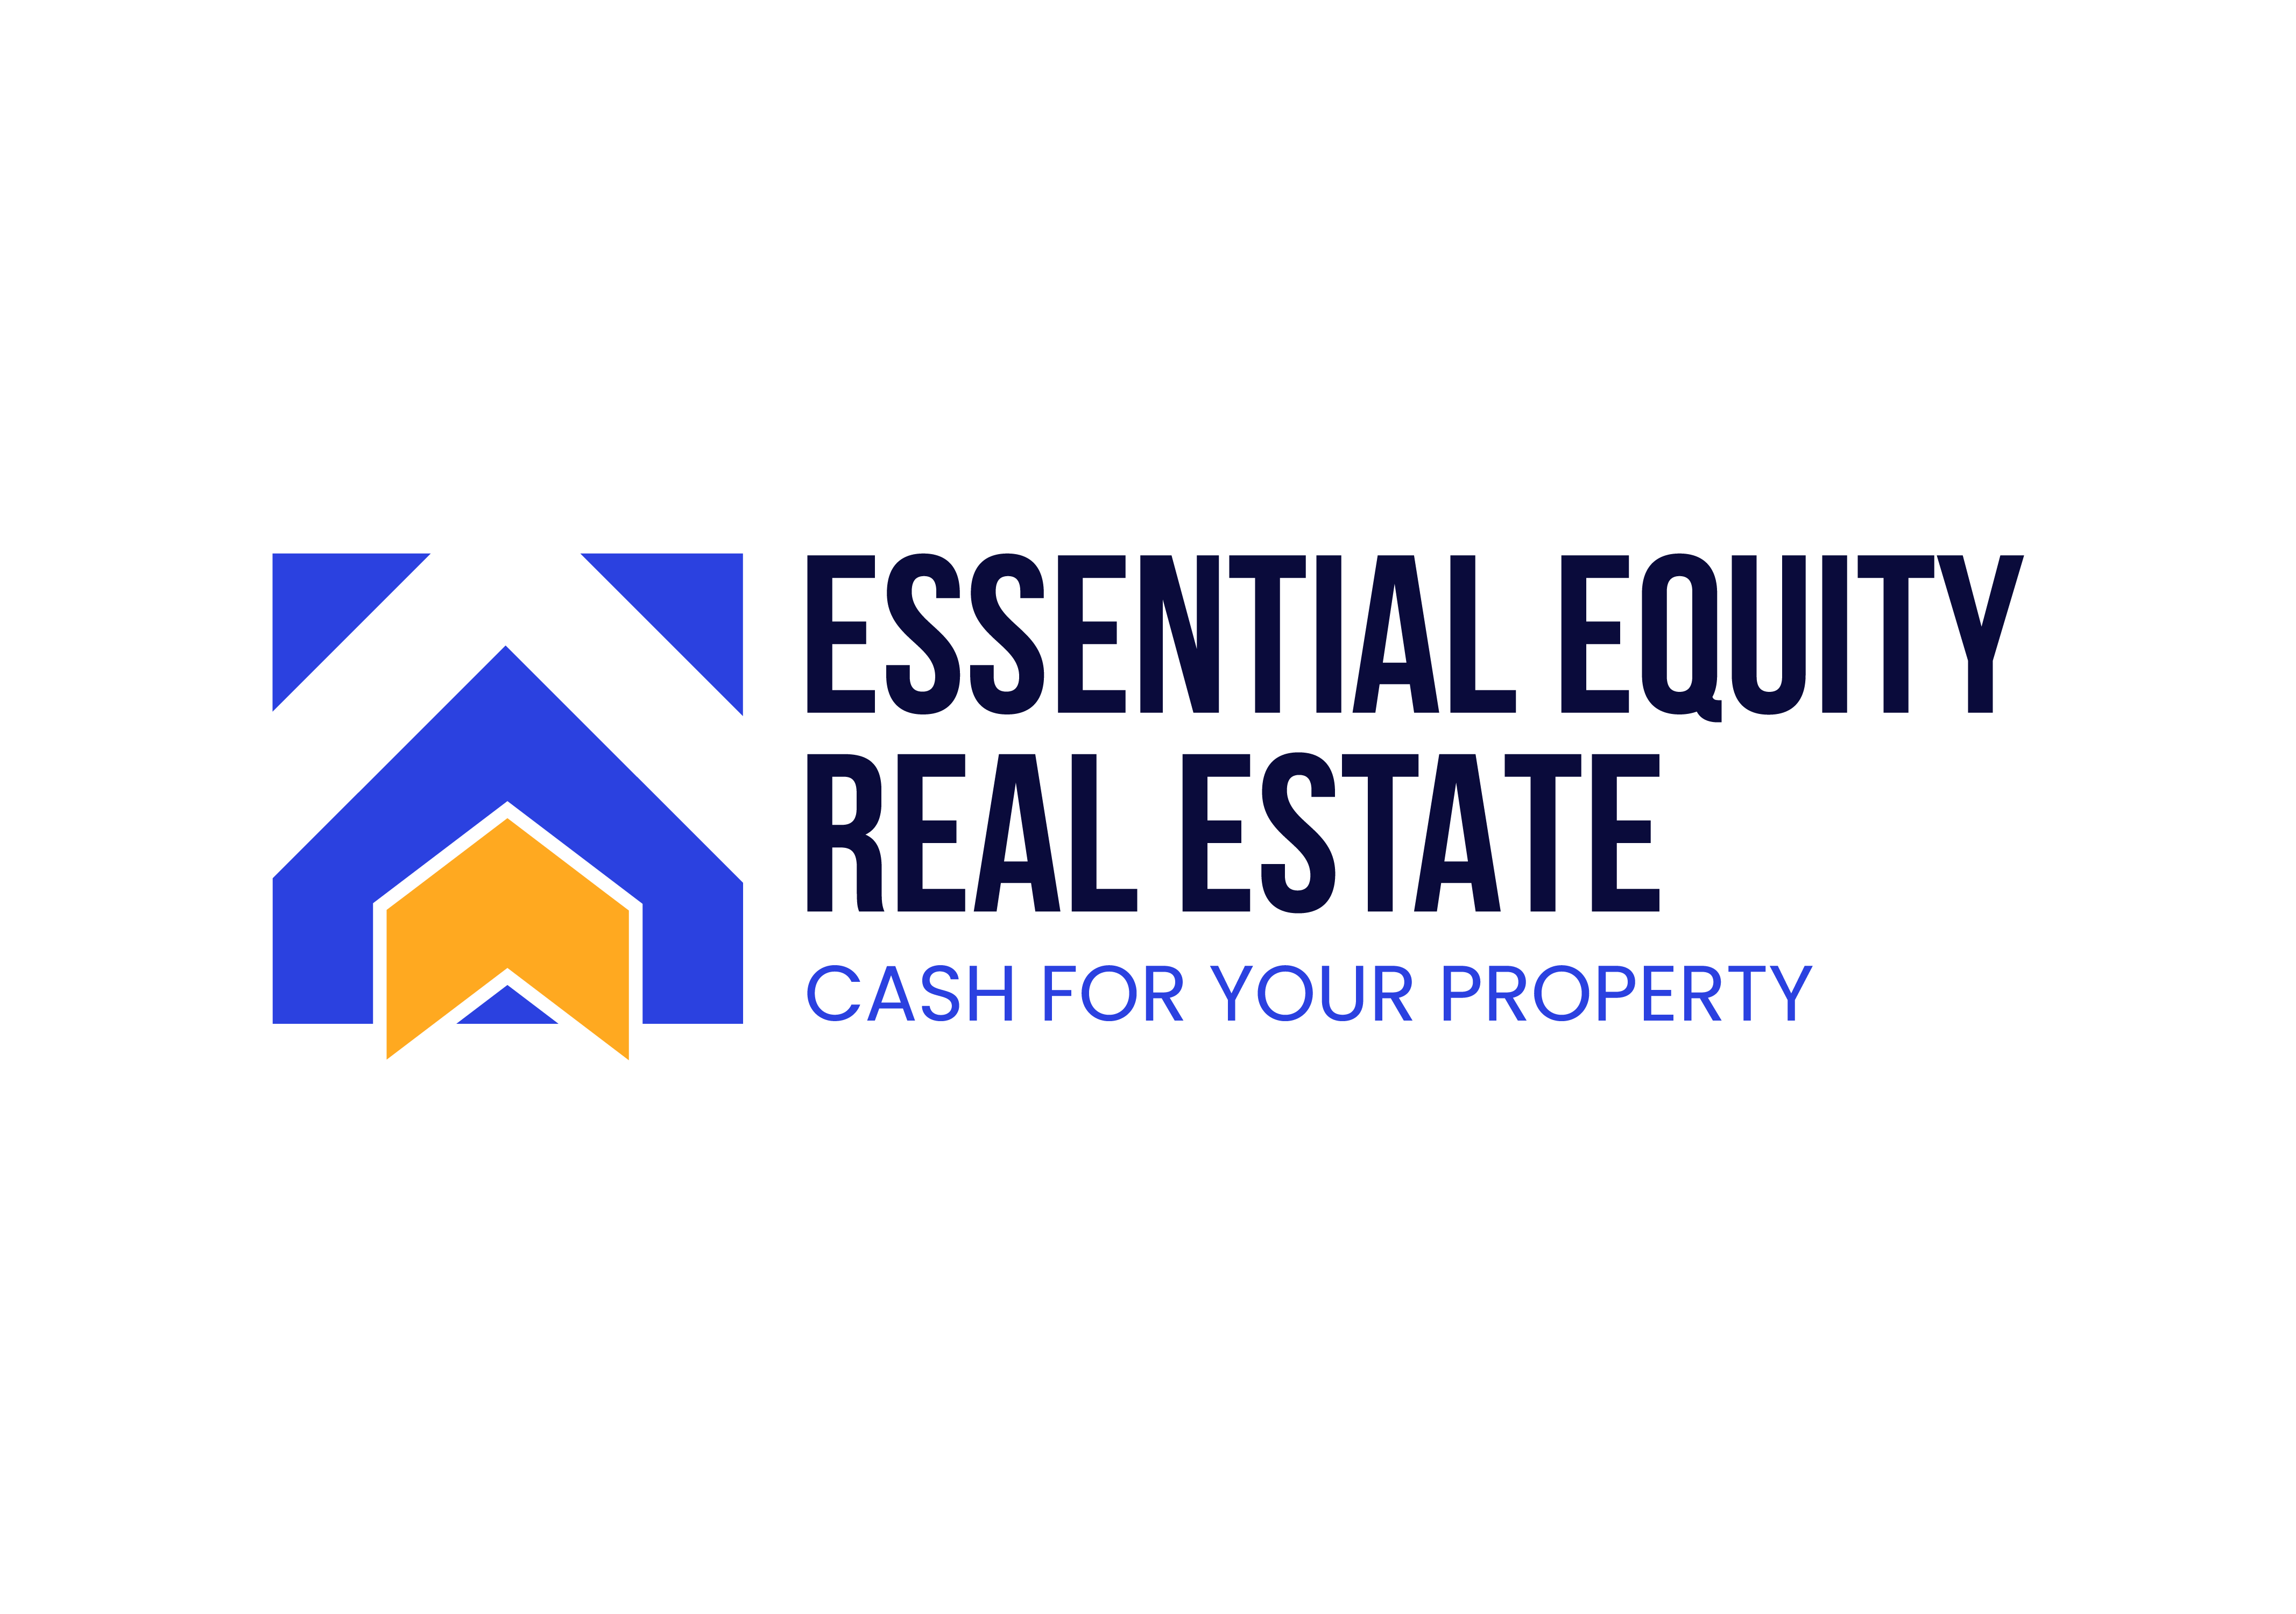 Essential Equity Real Estate Outlines What Separates Them from Other Cash Home Buyers Companies 